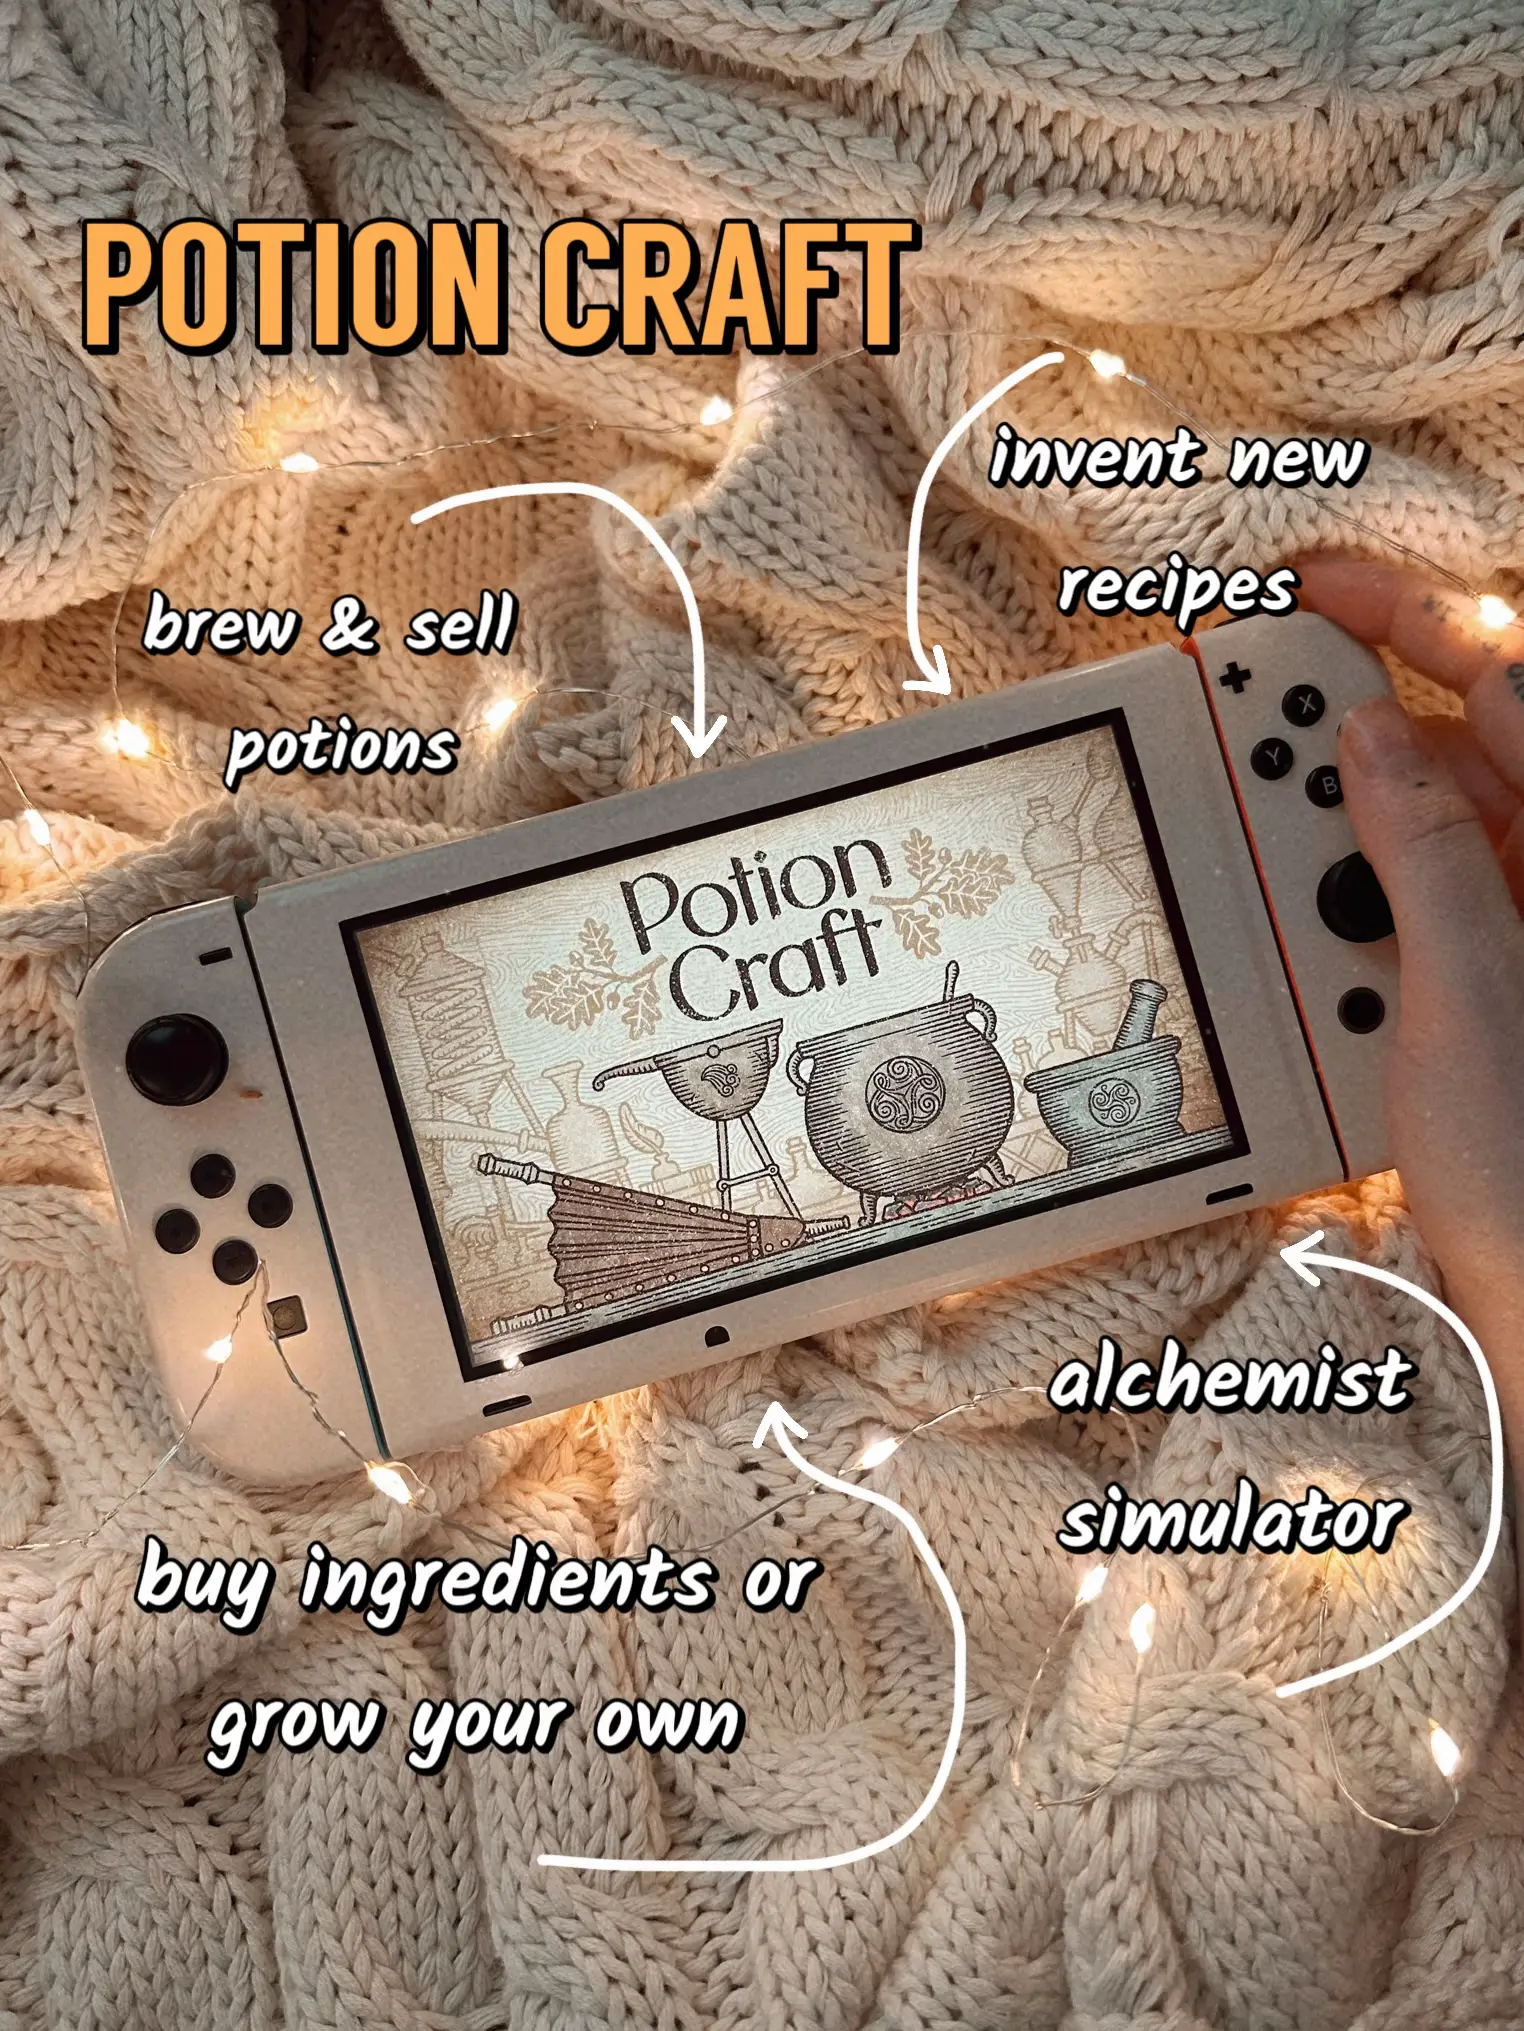  A person holding a Nintendo Wii controller with a potion craft image on the screen.